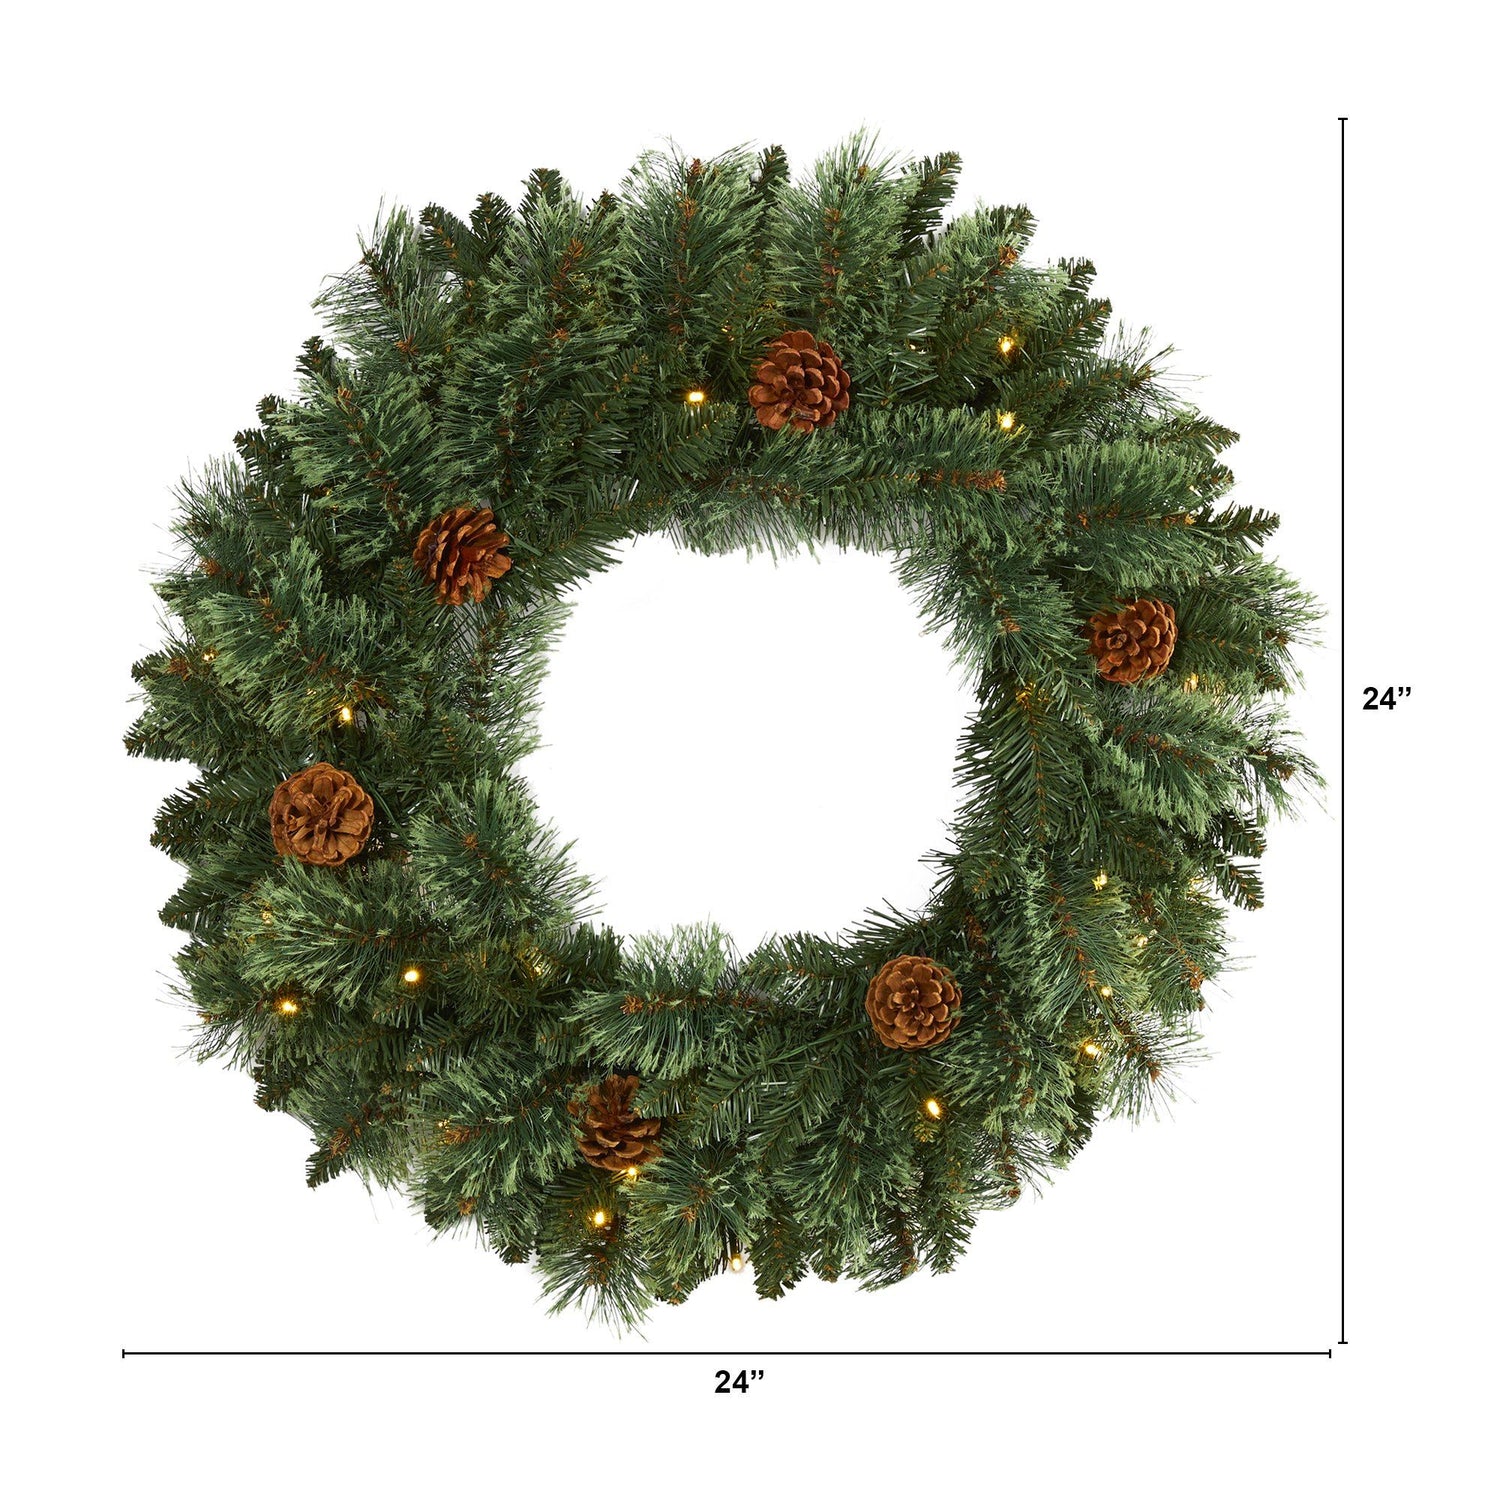 24” White Mountain Pine Artificial Christmas Wreath with 35 LED Lights and Pinecones